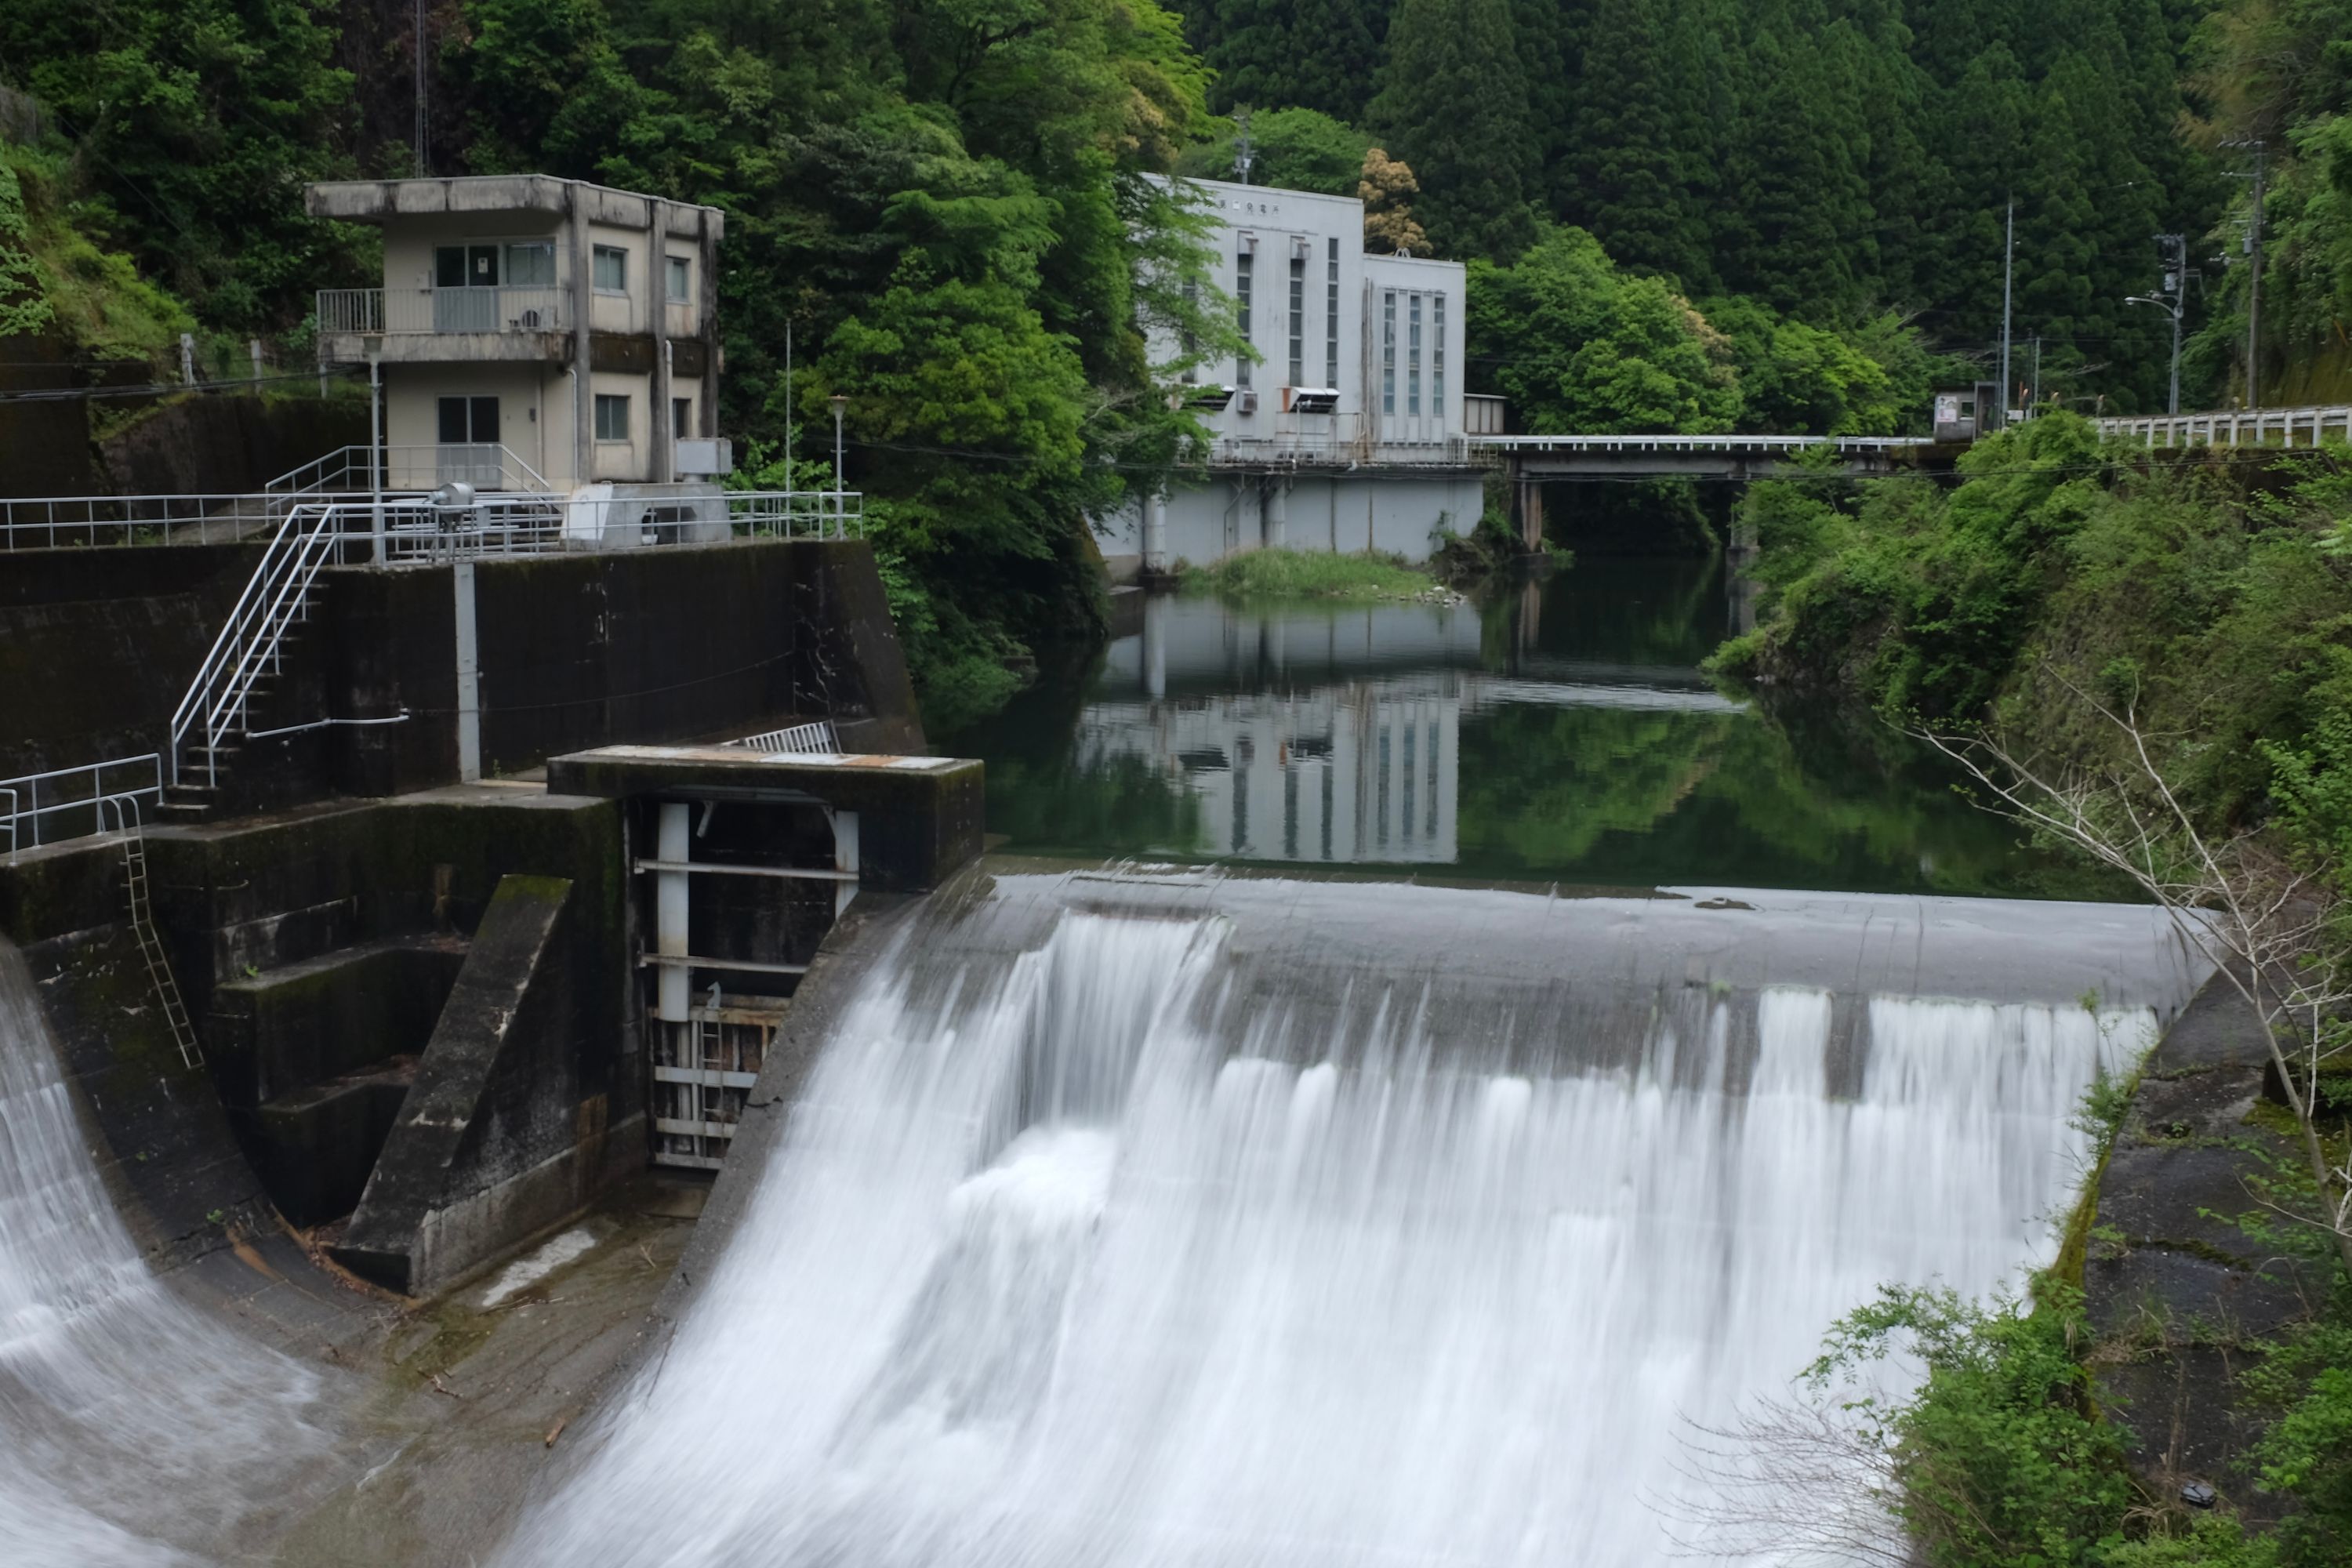 Water cascades over the dam of a small hydroelectric power station.